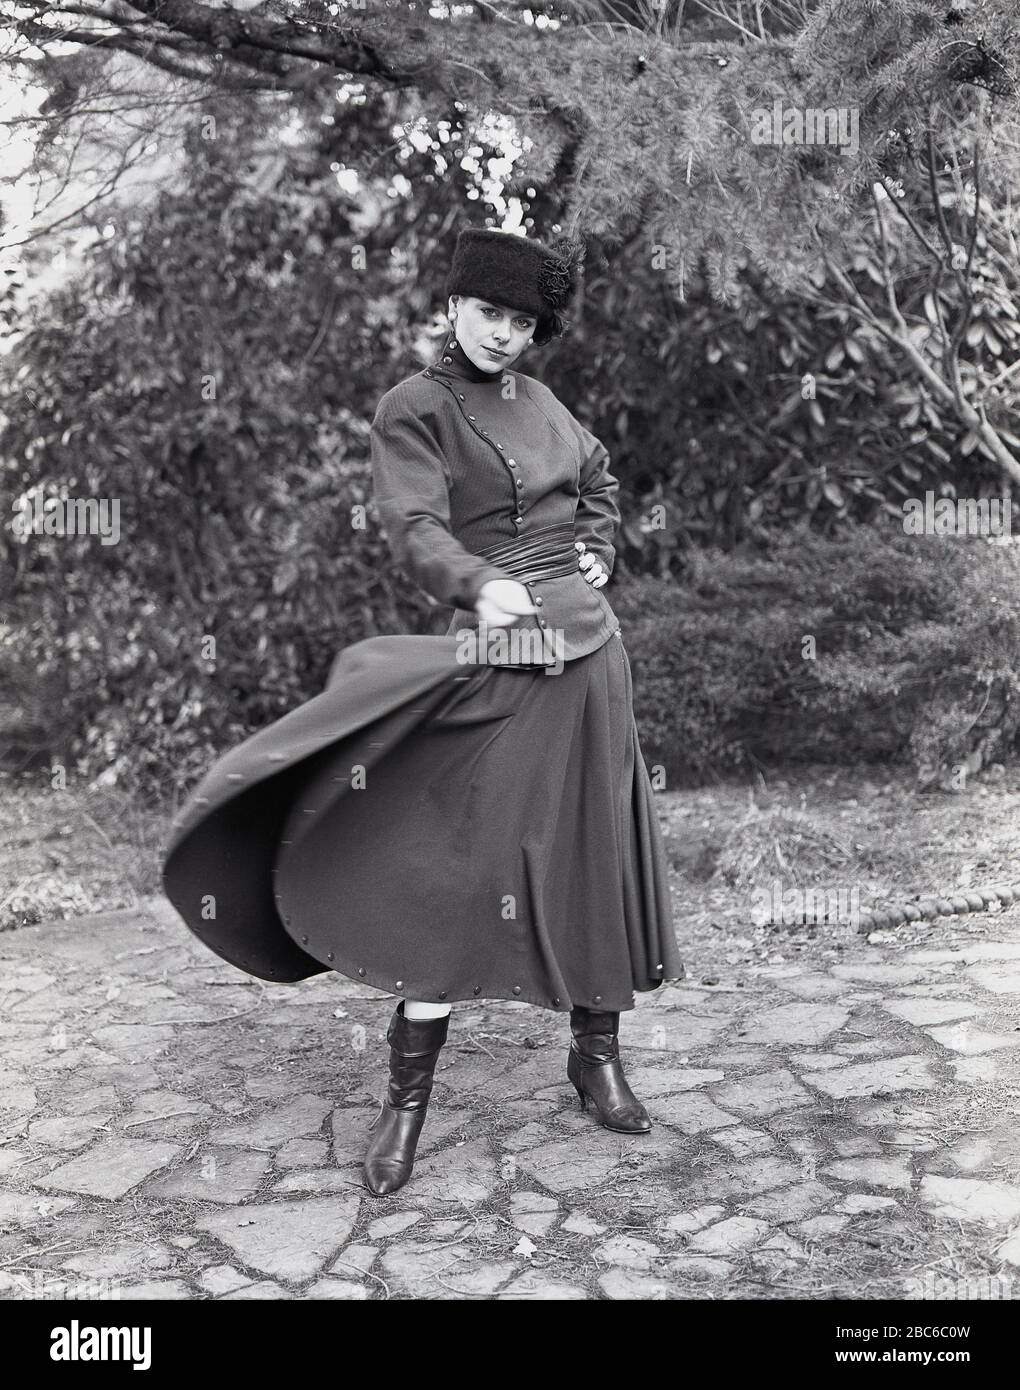 1960s, historical, a lady outside modelling the latest russian military style or 'Cossack' fashion, consisting of fur hat, high-necked top, long skirt and boots, England, UK. A group of great Russian military warriors known for their bravery, the word 'cossack' is derived from the Turkic term 'kayak' that means 'free man' or 'adventurer'. Stock Photo